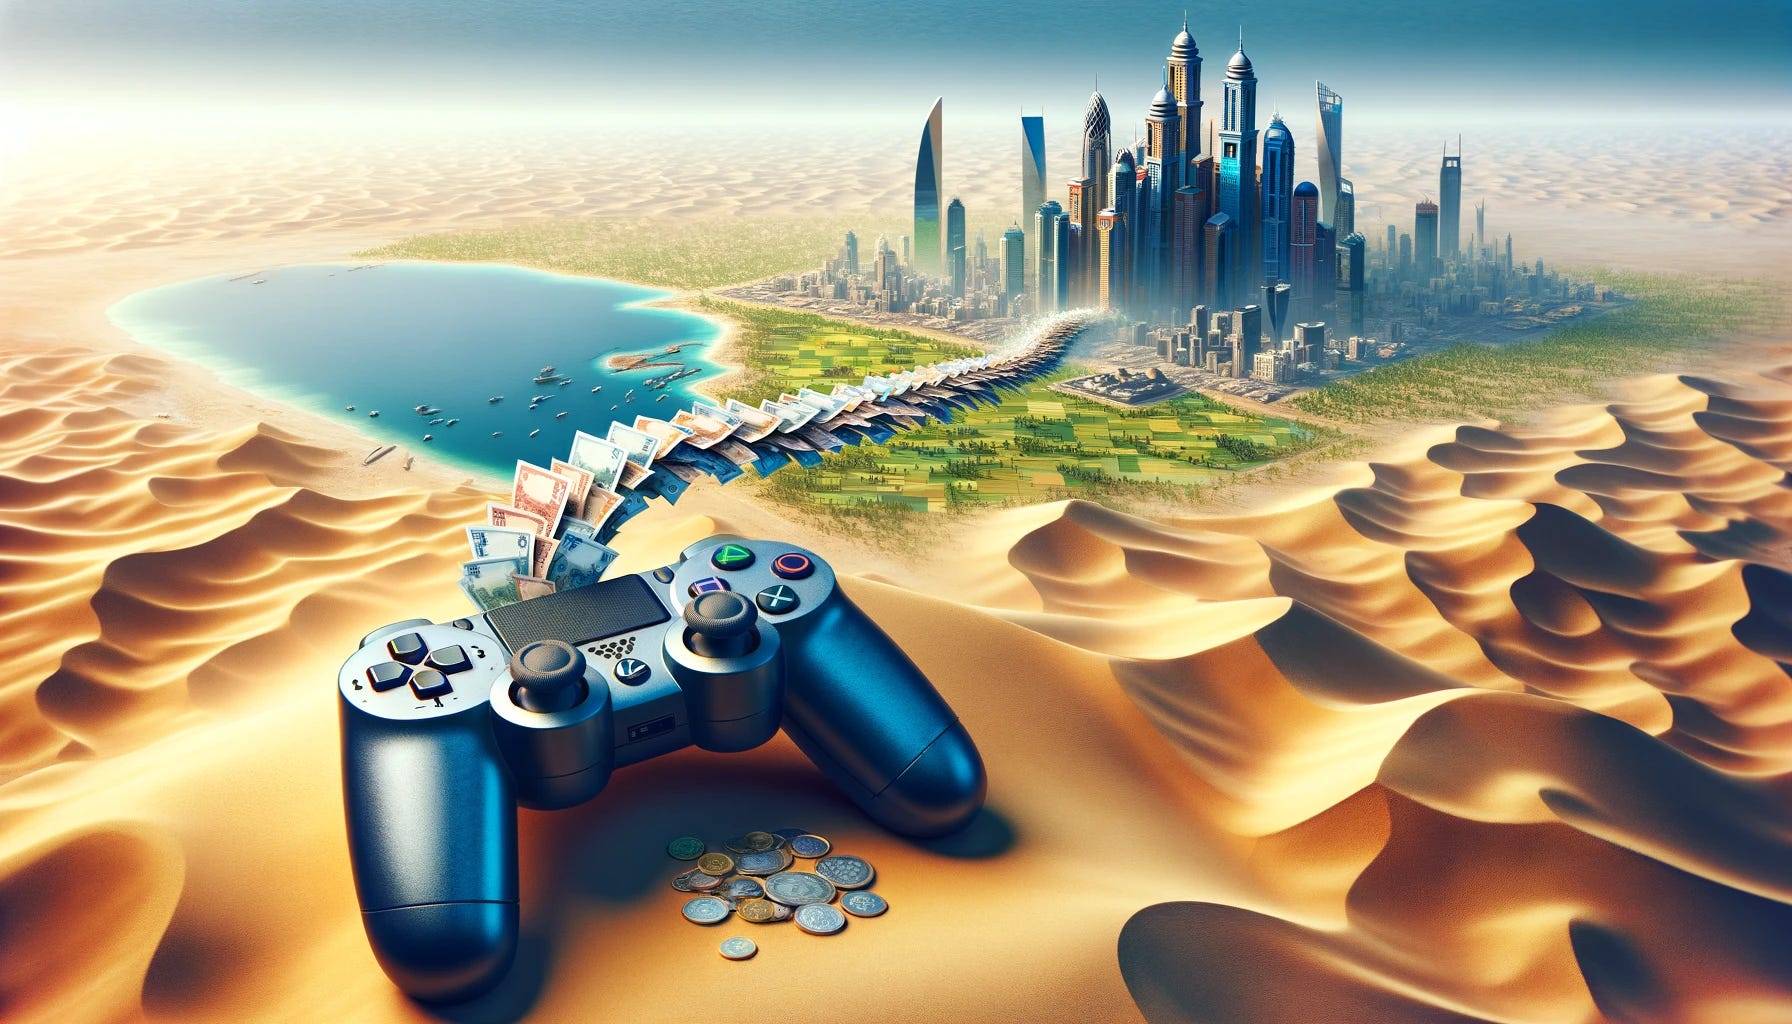 Wemade and Whampoa Digital Launch $100 Million Web3 Fund For Blockchain Gaming in the Middle East